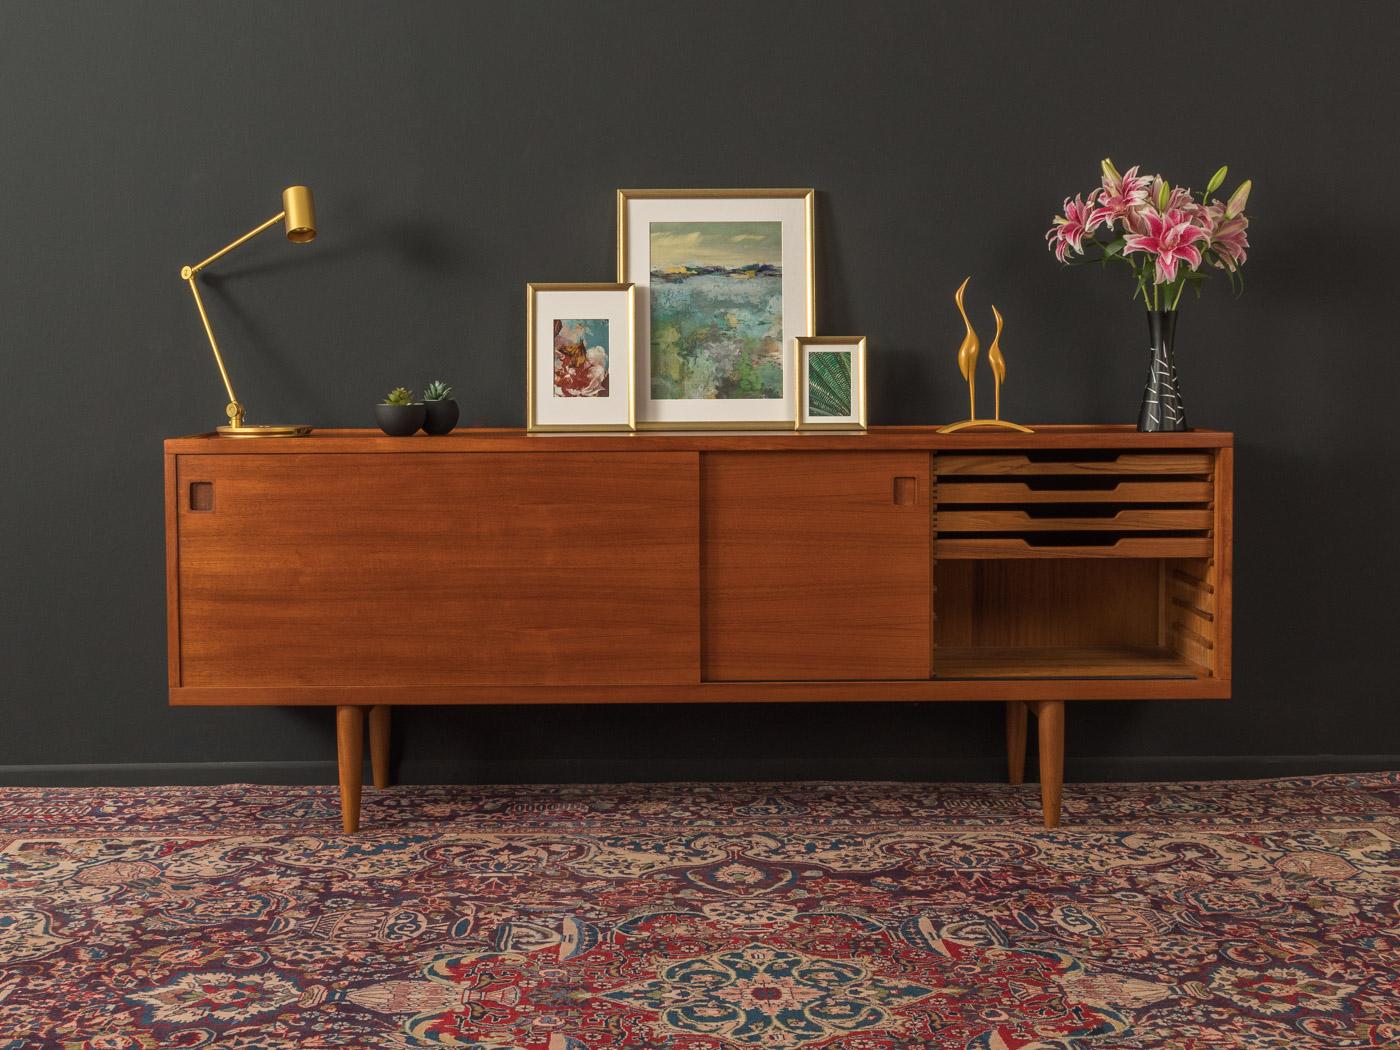 Classic sideboard from the 1960s. Model 20 by Niels O. Møller for his own furniture production company JL Møllers Møbelfabrik. Corpus in teak veneer with two sliding doors, four internal drawers, two shelves and cigar shaped legs .

Quality